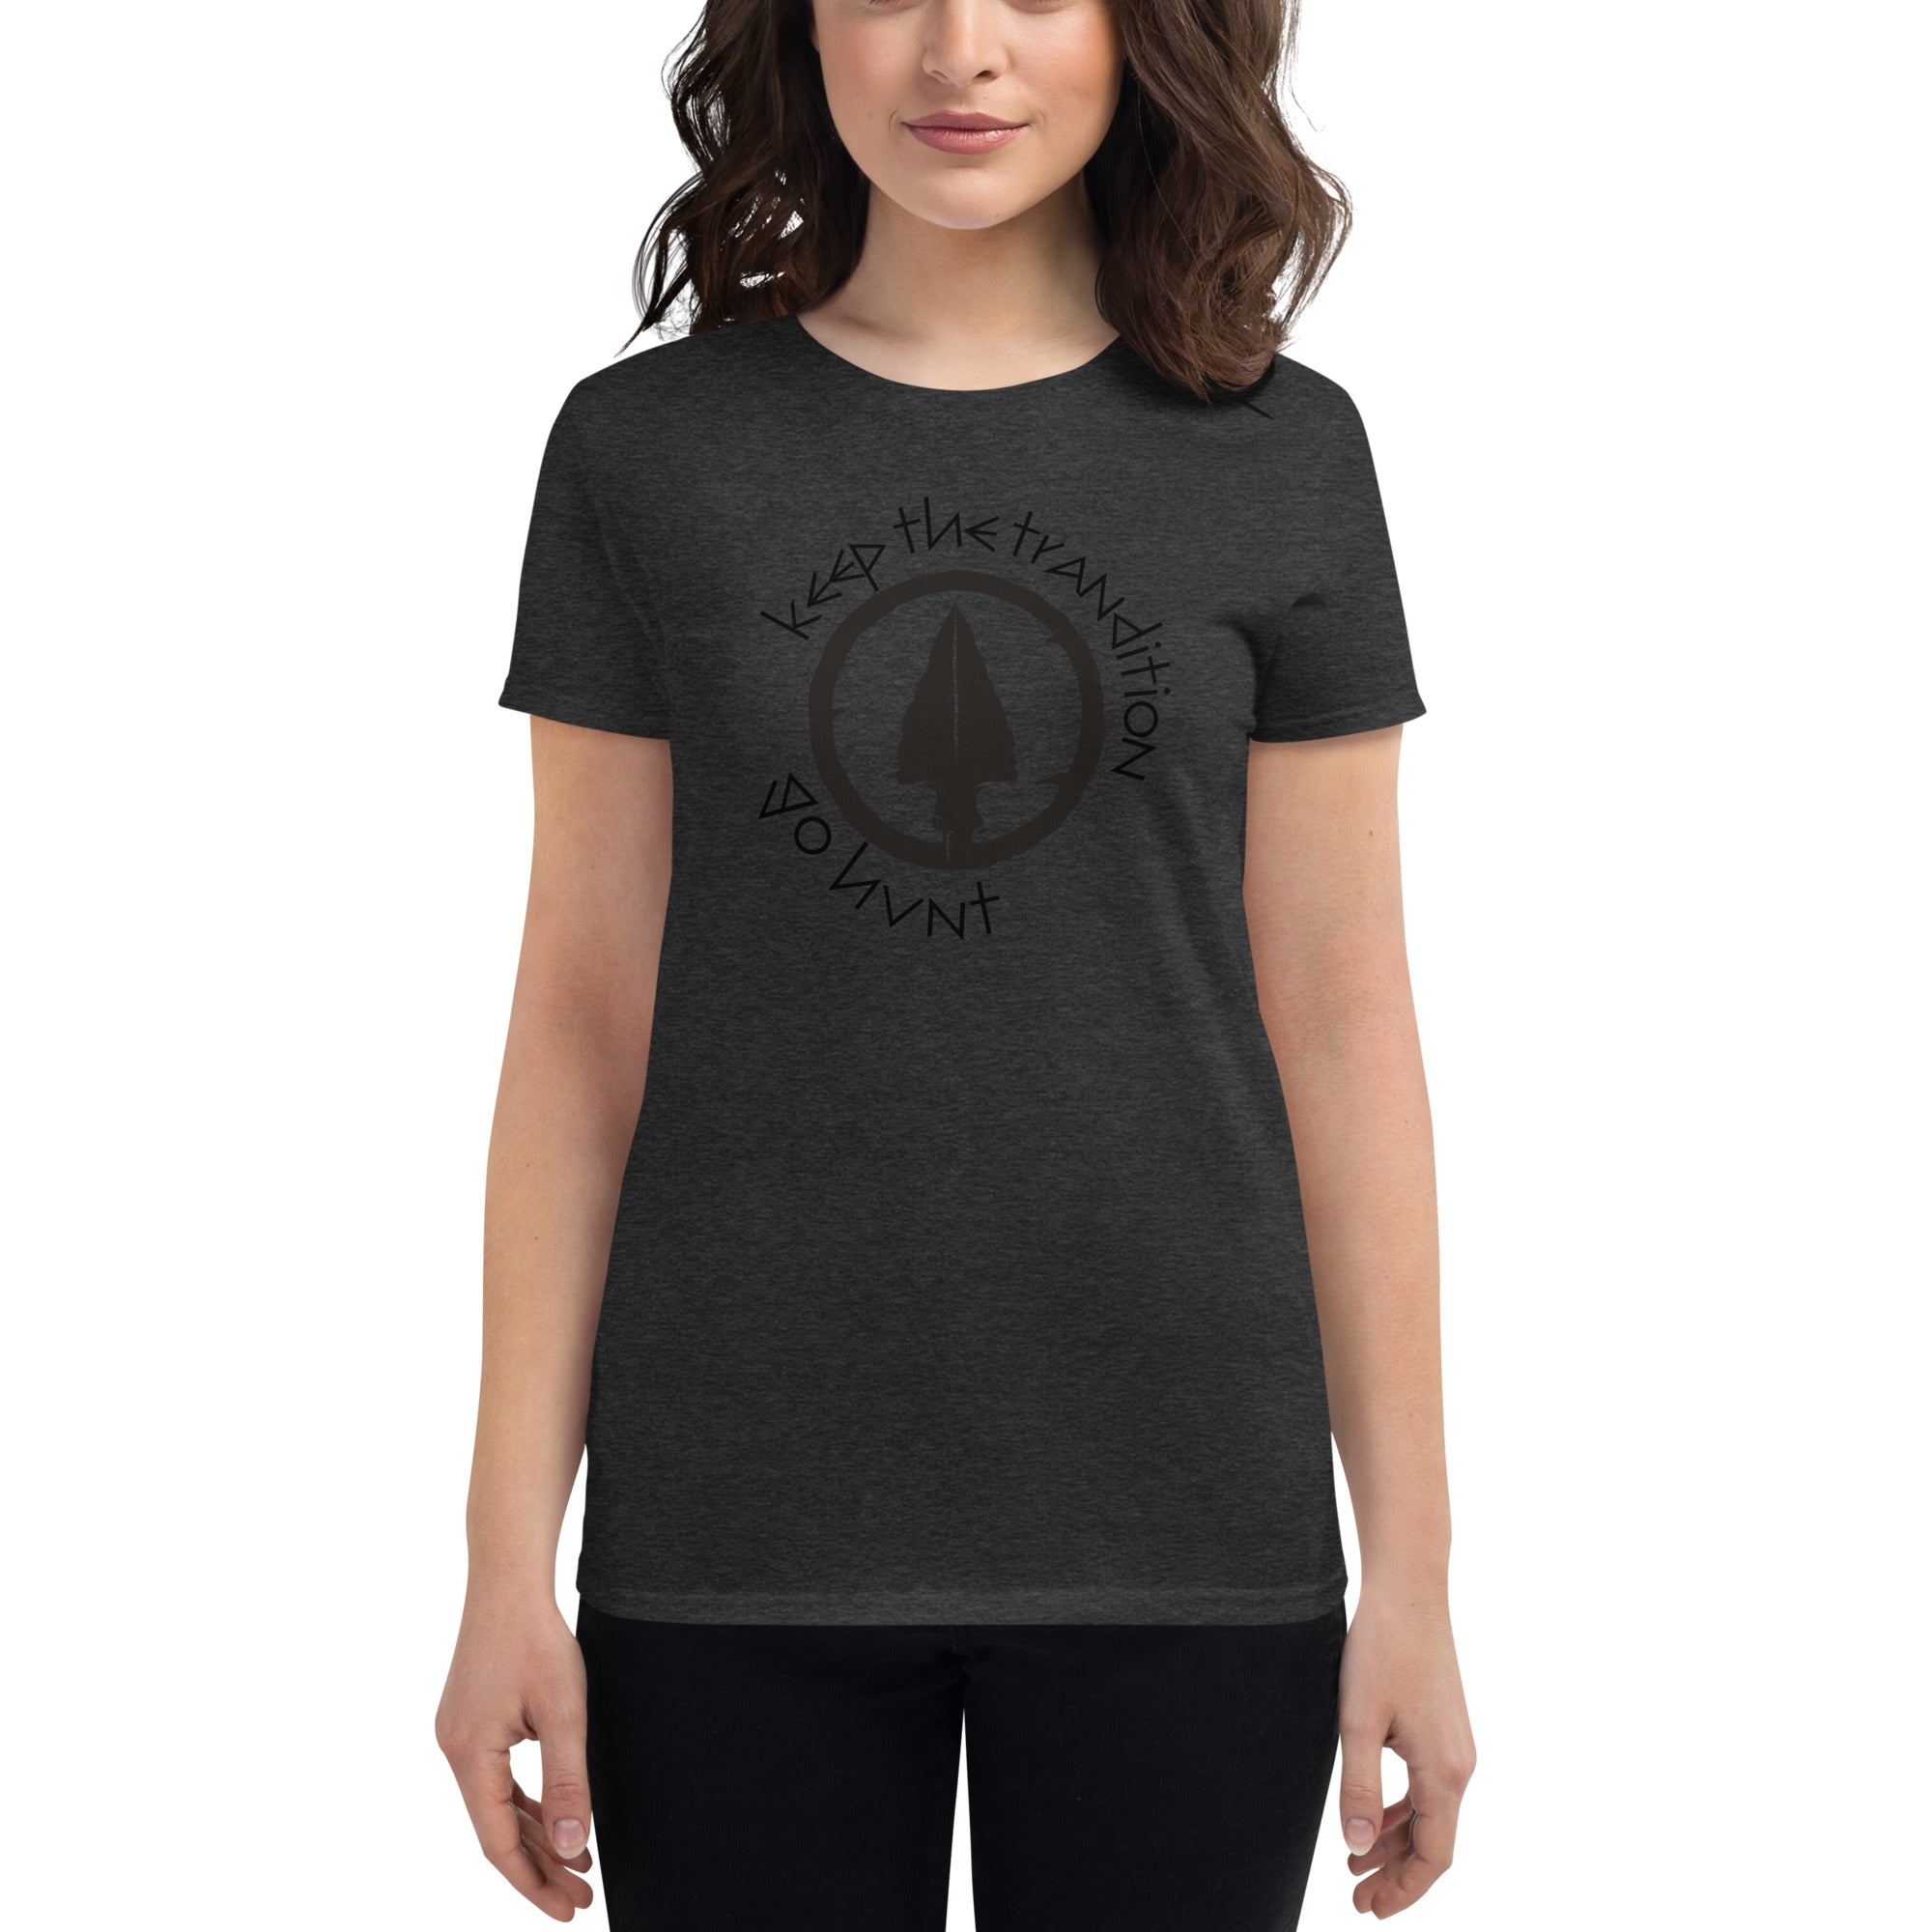 Keep The Tradition Women's Fitted T-Shirt - Go Hunt